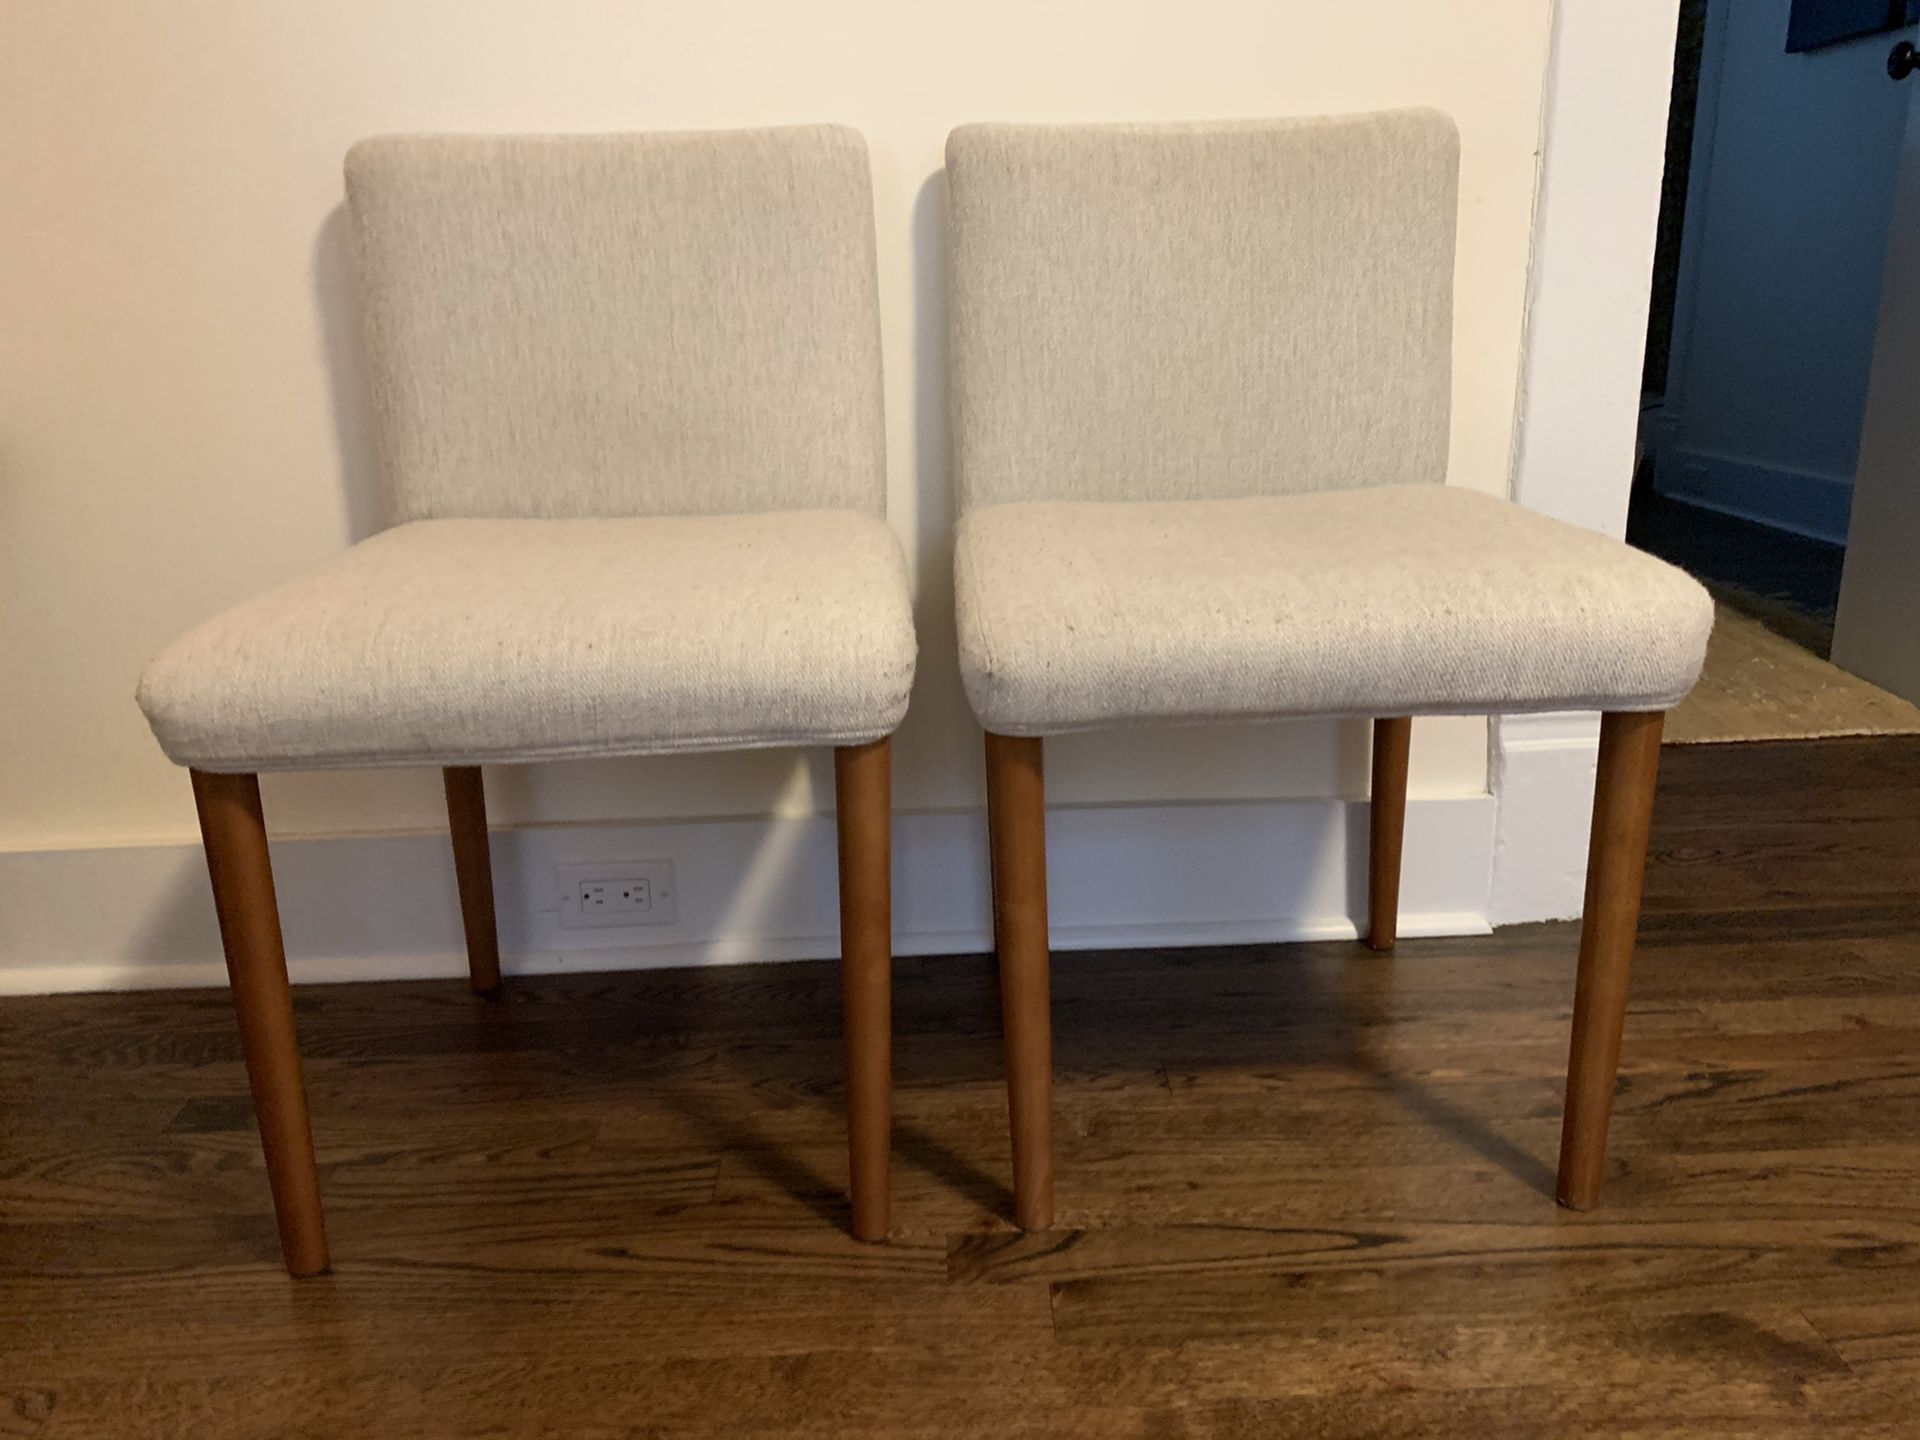 Two West Elm Upholstered Dining Room Chairs